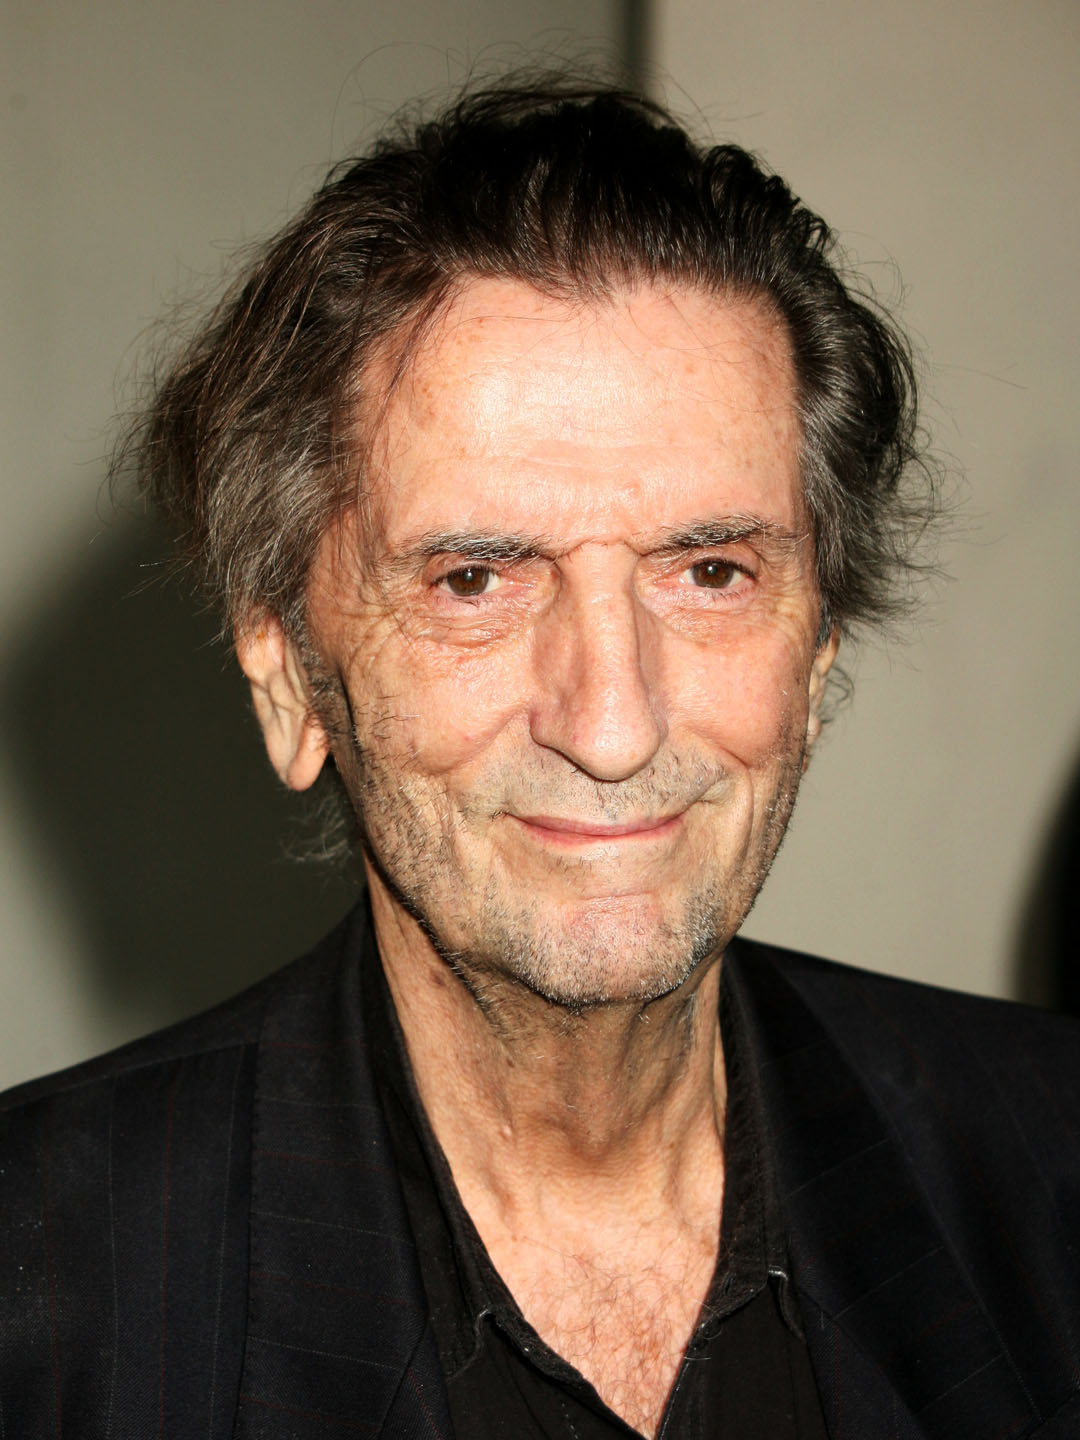 How tall is Harry Dean Stanton?